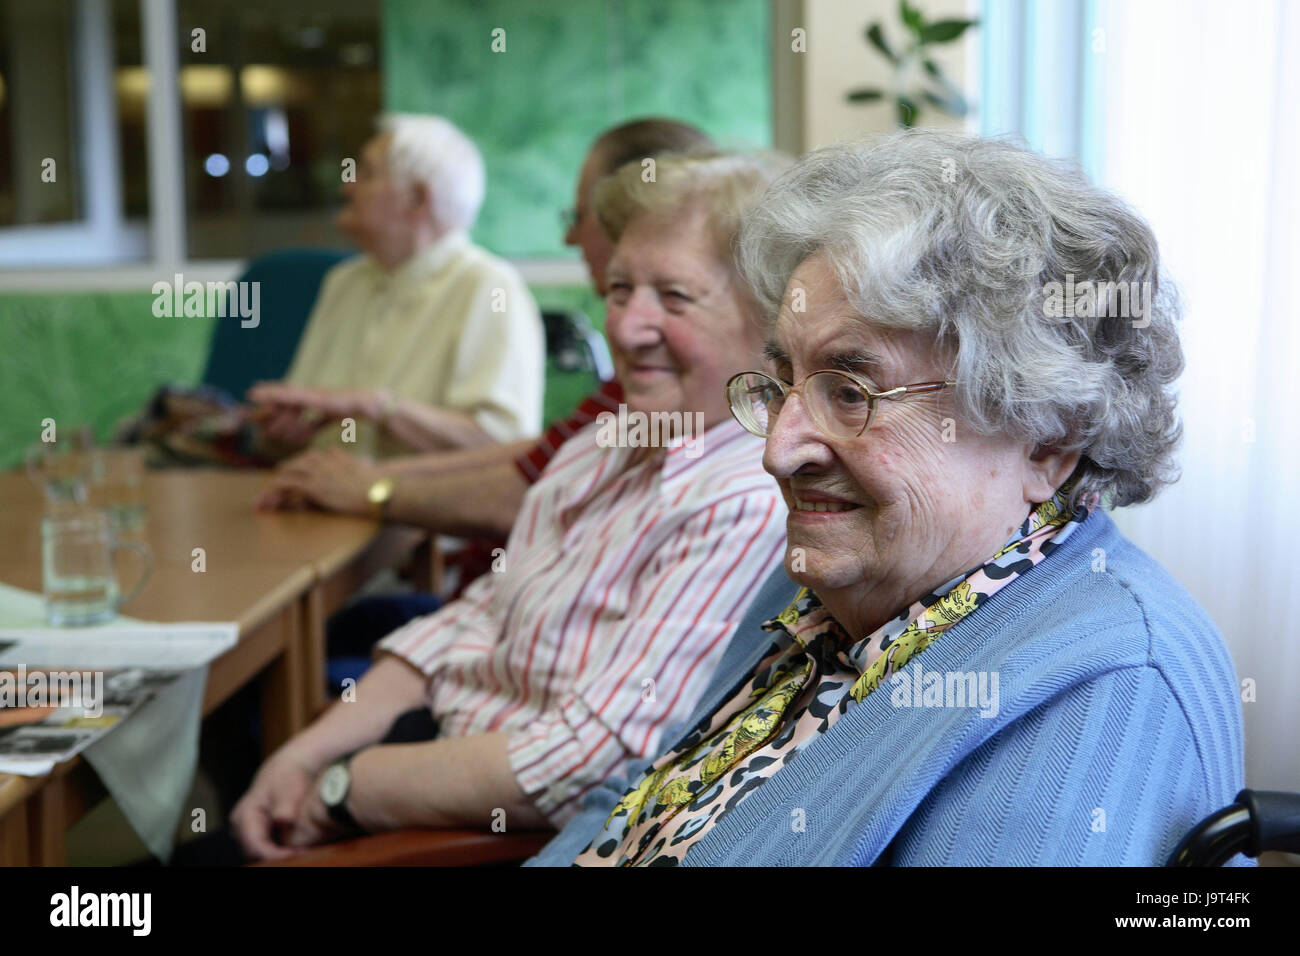 Old people's home,seniors,smile,leisure time,sit,table,newspaper,detail,at the side,portrait,person,read,old people's home,social contacts,leisure time activity,old person,old,home inhabitant,old age,company,entertainment,community,women,man,inside,senior citizens, Stock Photo